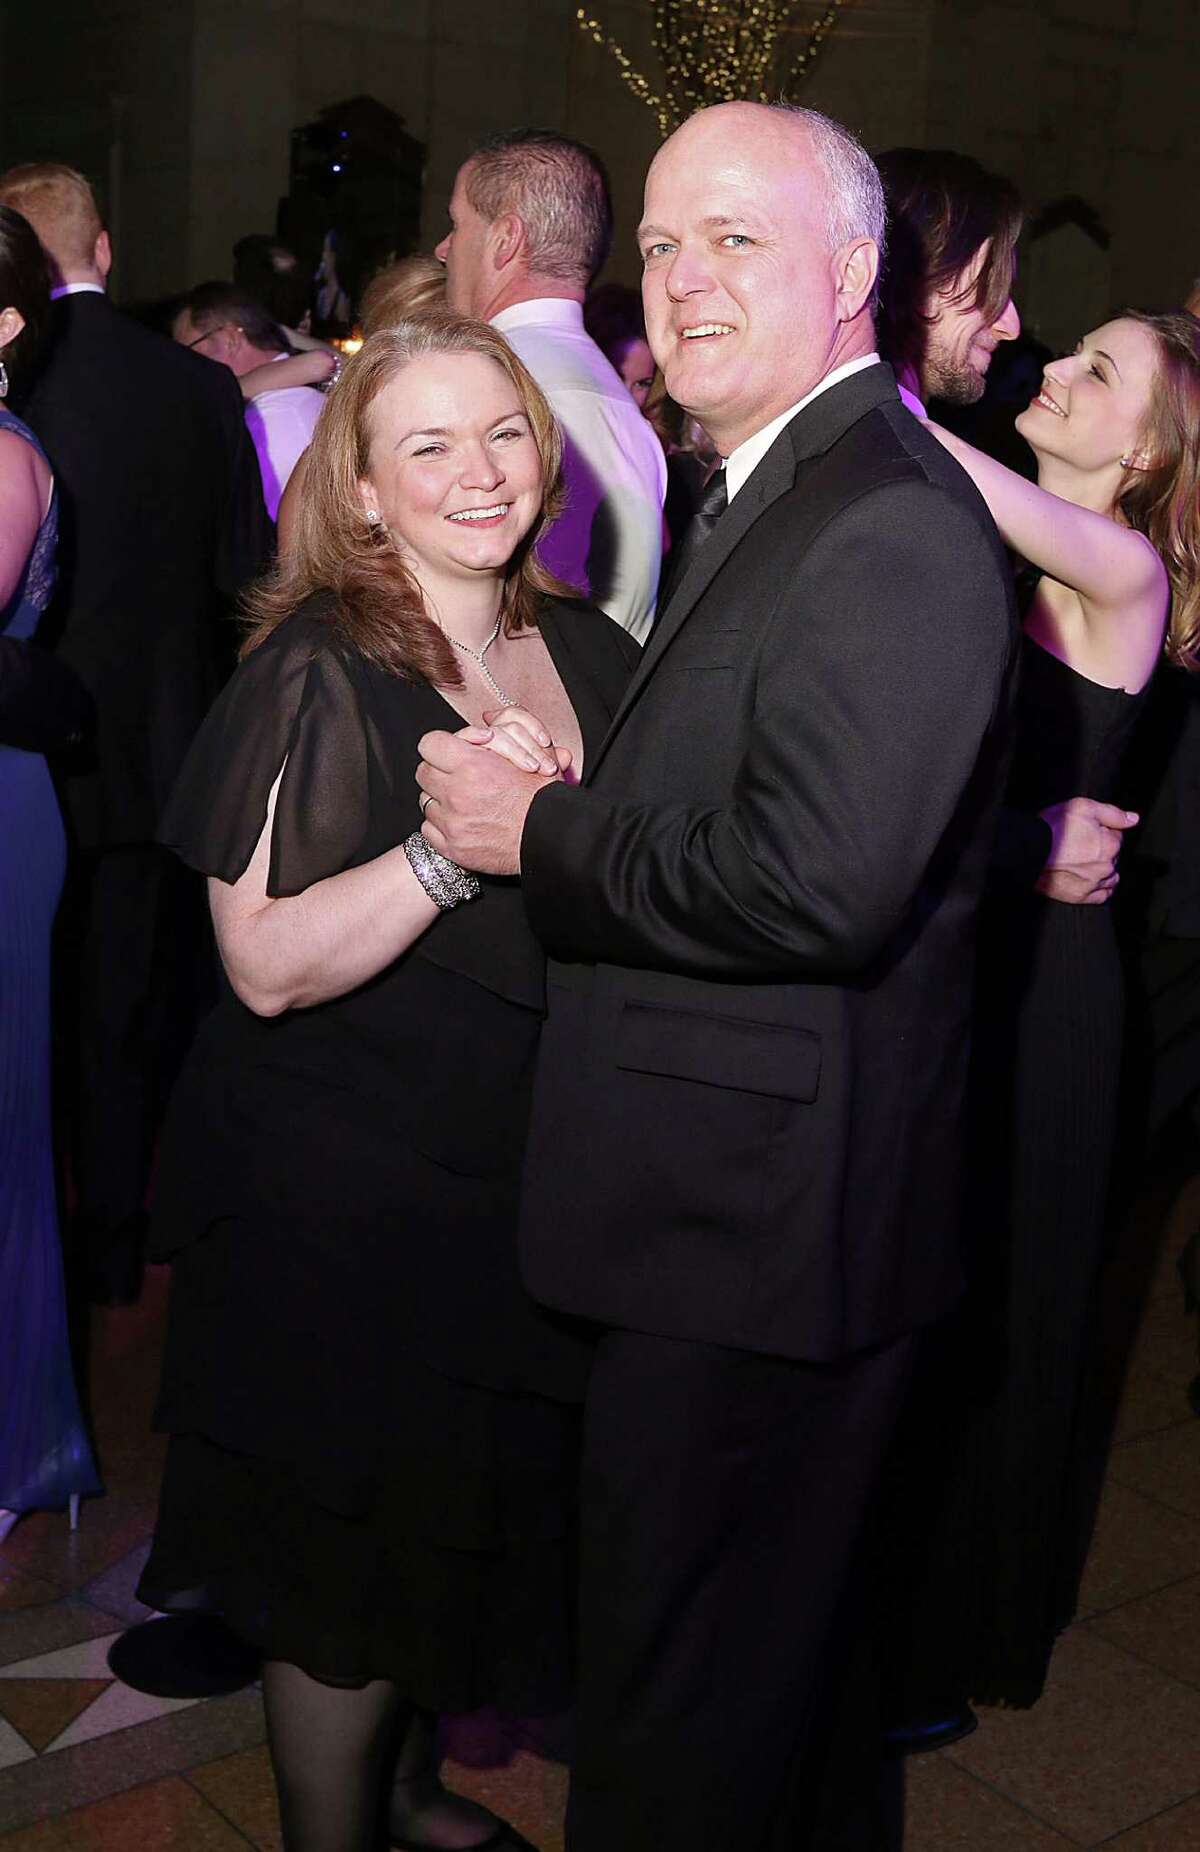 Were you Seen at the Make-A-Wish Northeast New York Gala at the Hall of Springs in Saratoga Springs on Saturday, March 28, 2015?